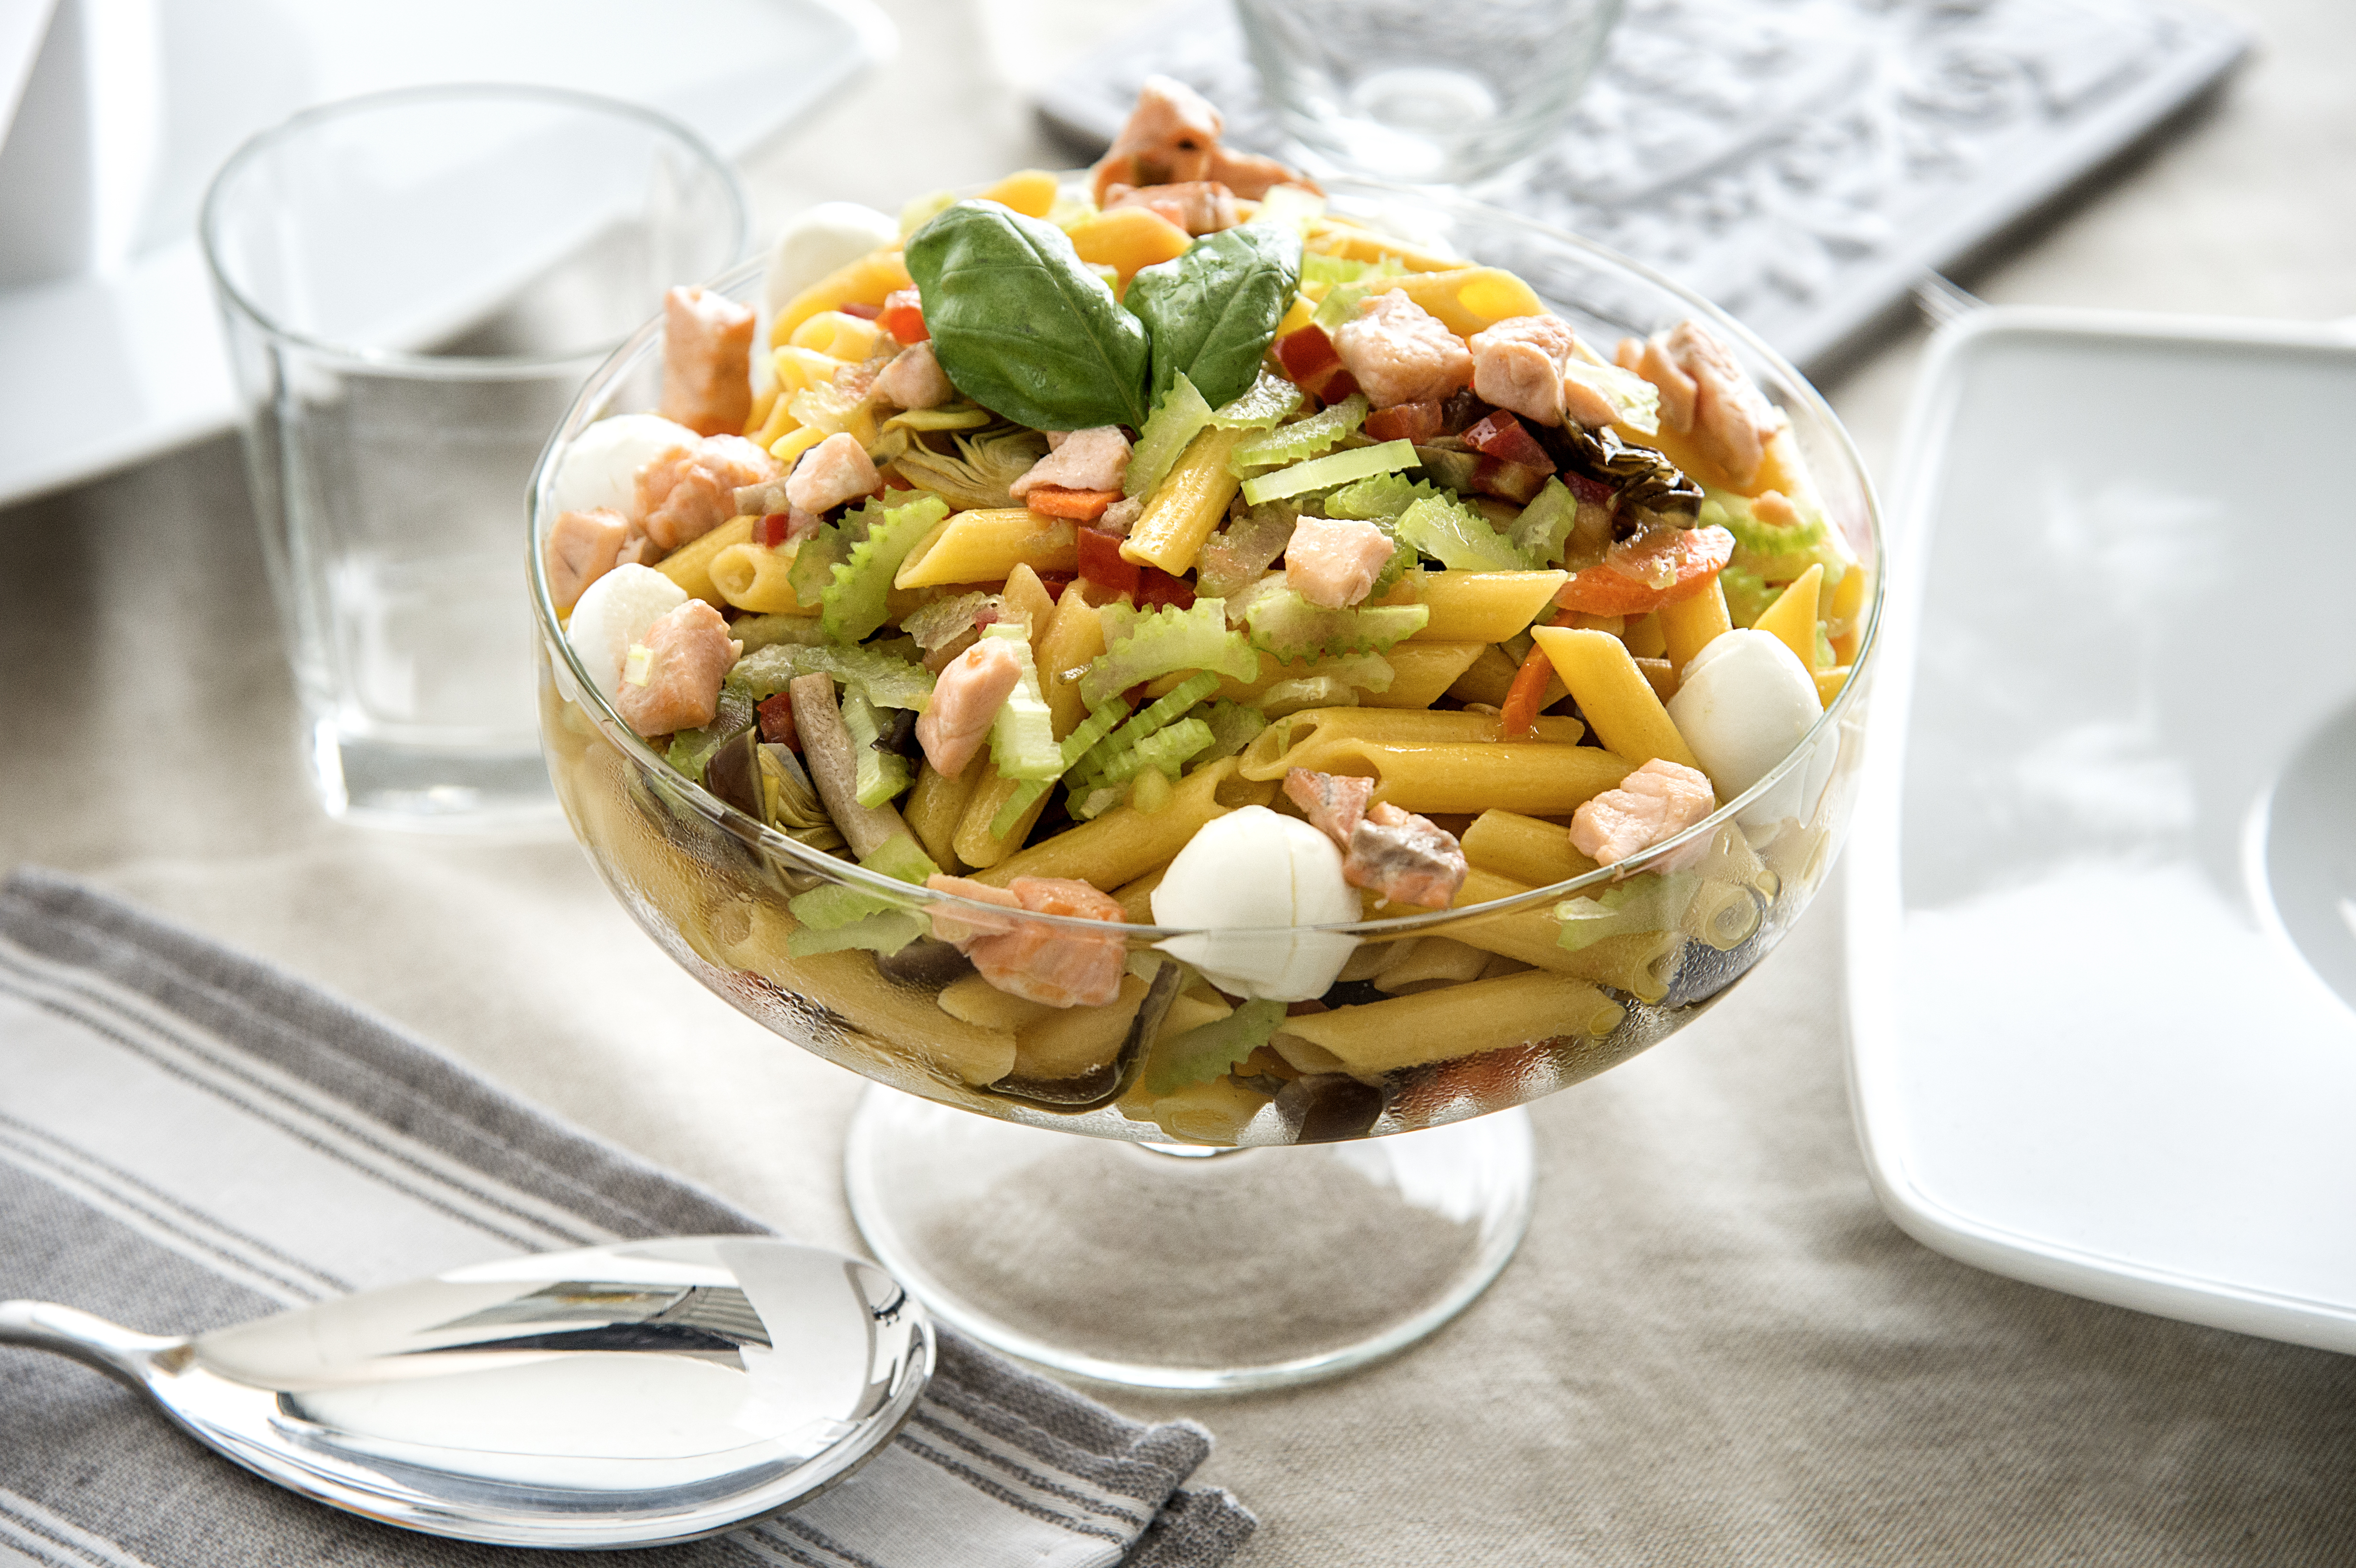 Gluten-free corn penne salad with crunchy vegetables and buffalo mozzarella cherries